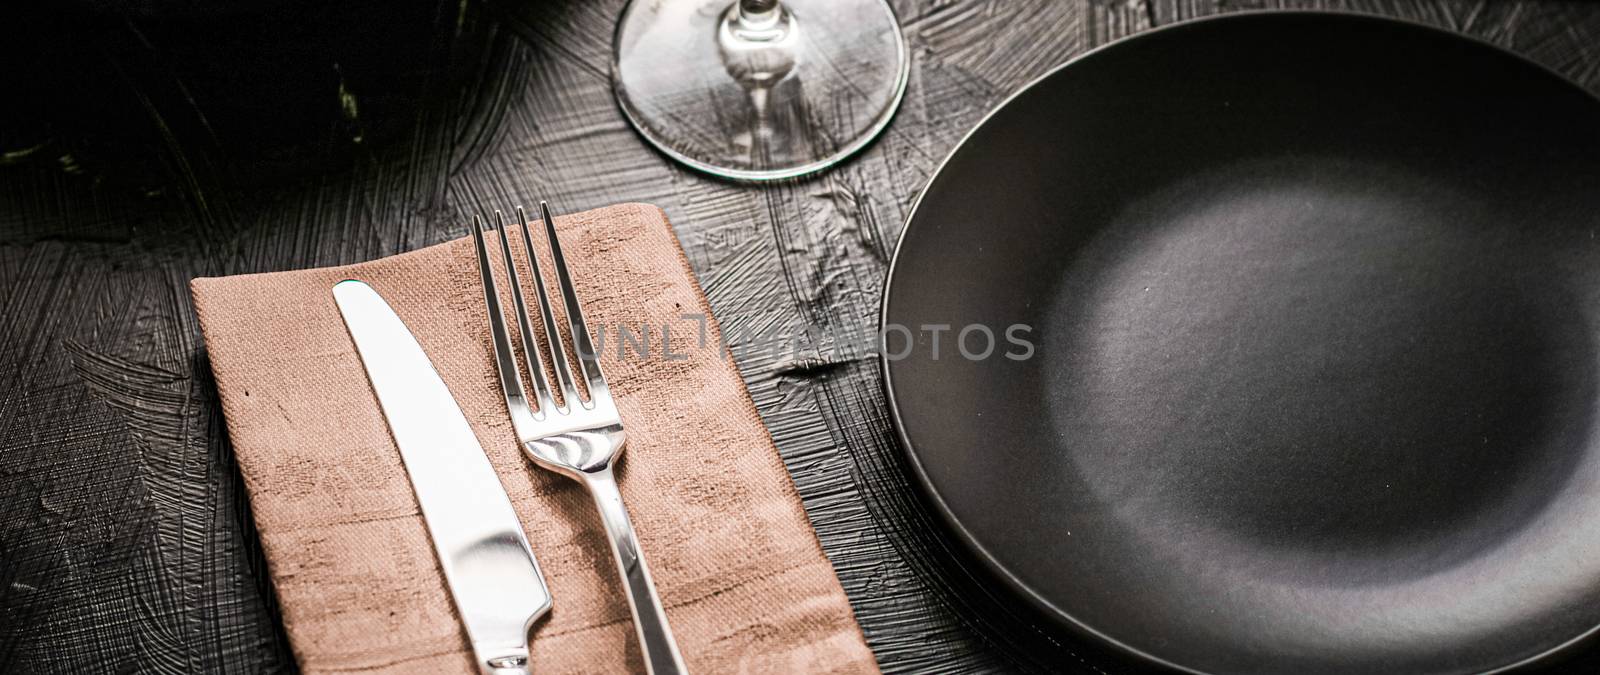 Dishware, menu and table concept - Empty tableware with beige napkin, food styling plating props, deluxe set for wedding, event, date, party or luxury home interior decor brand, holiday design